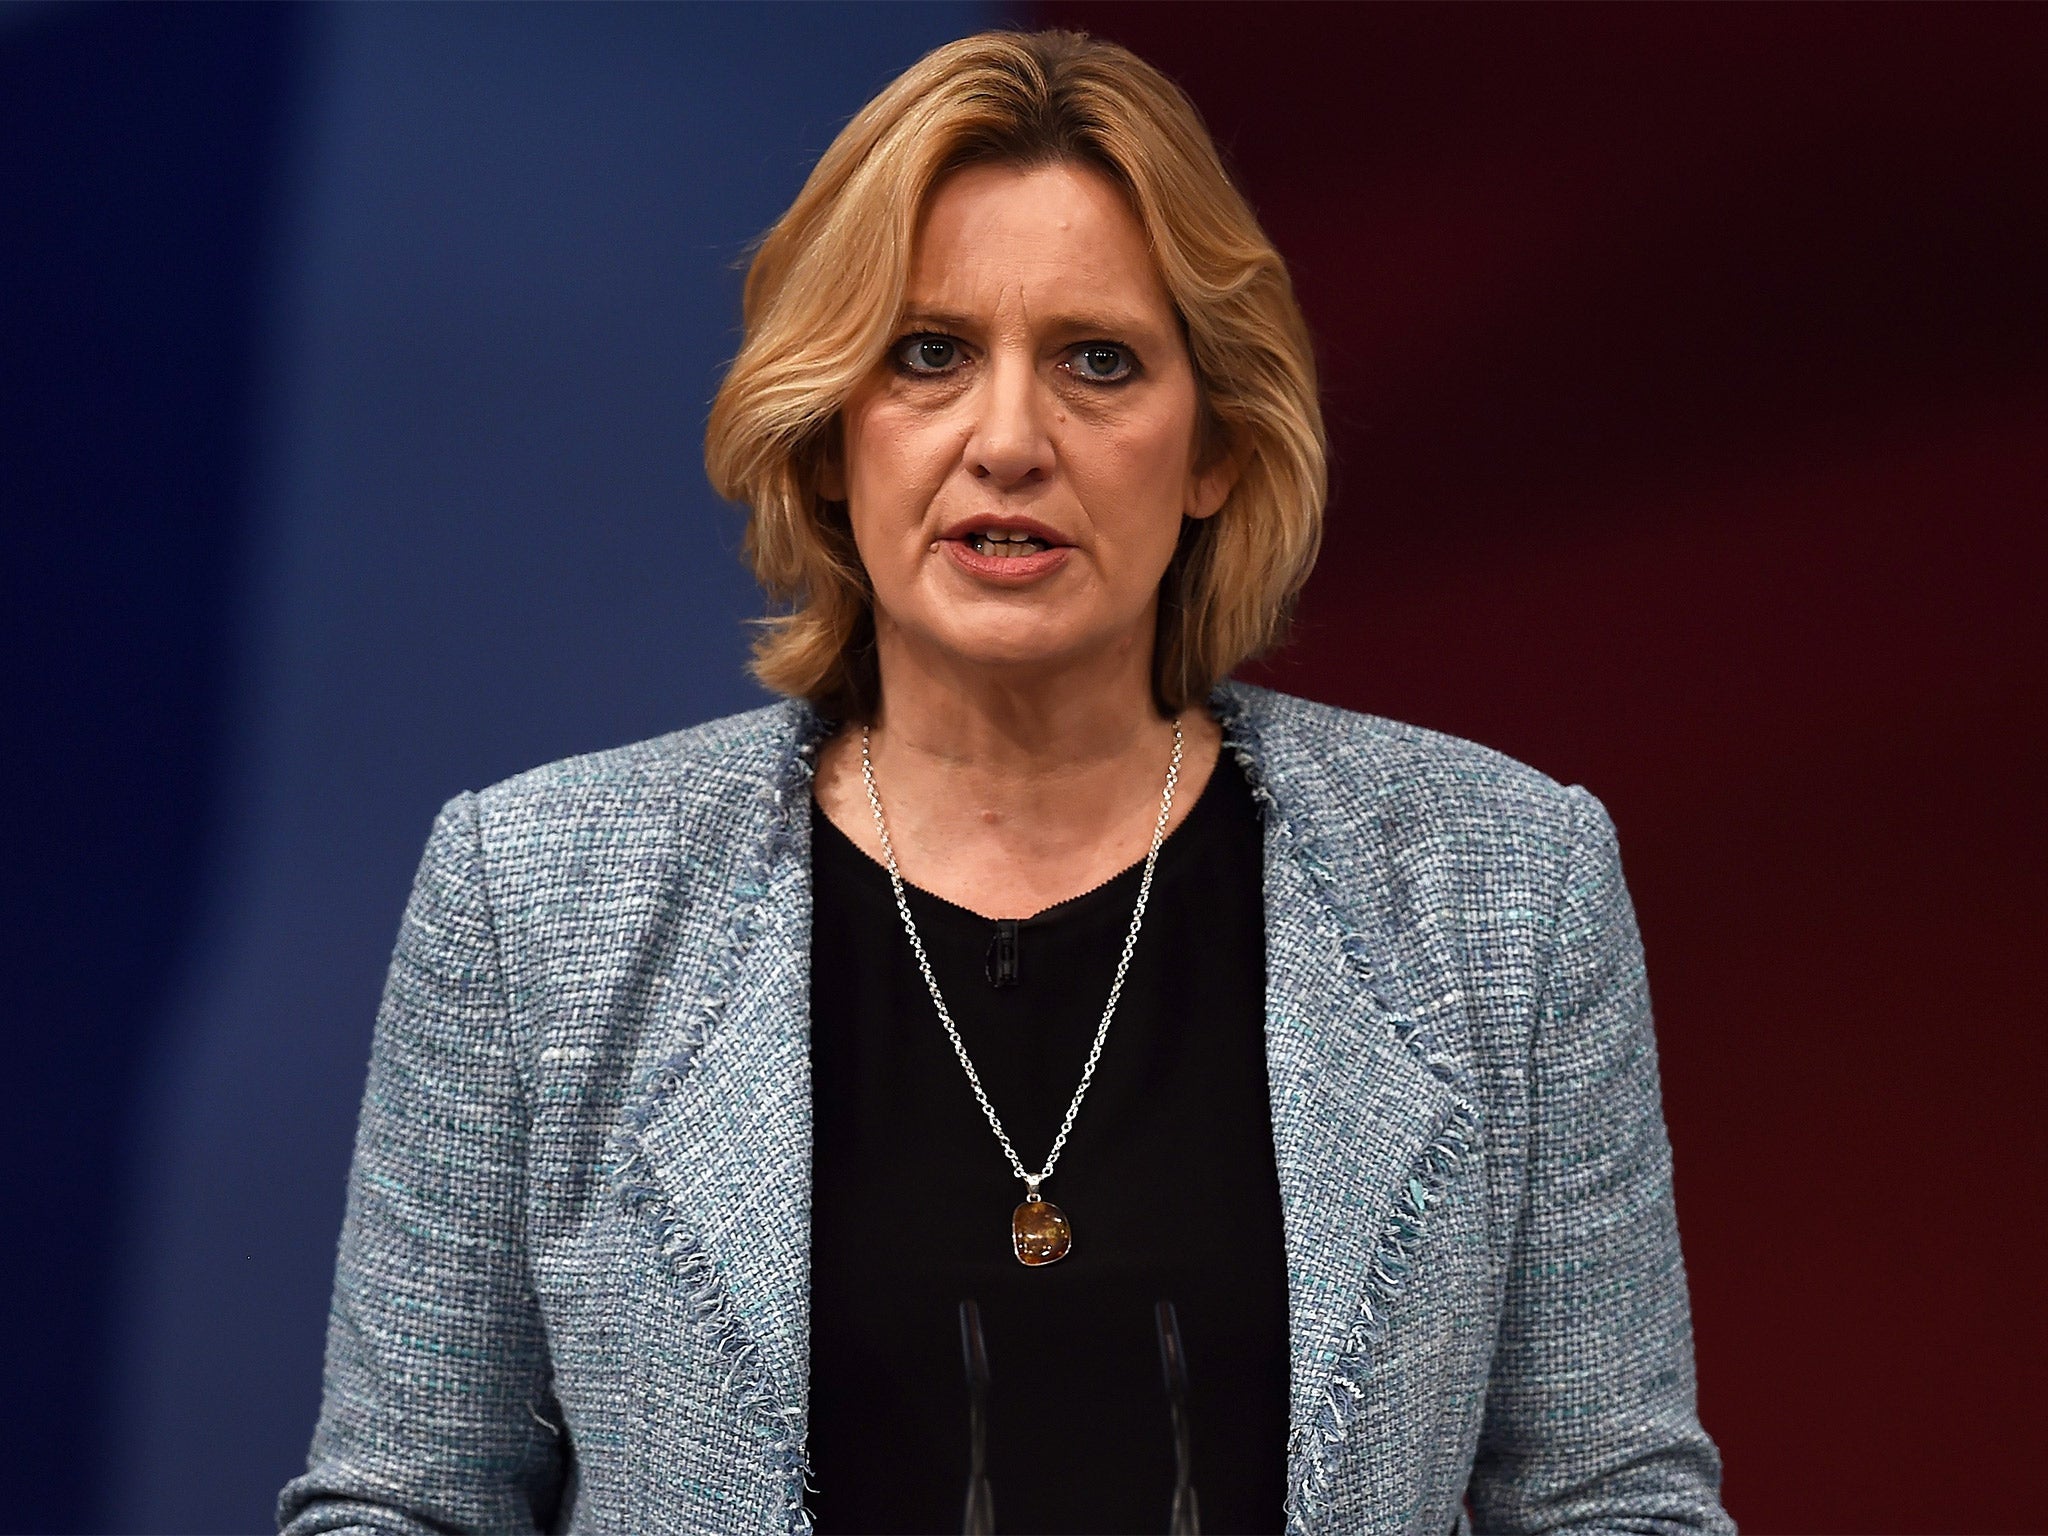 Amber Rudd, the Energy and Climate Change Secretary